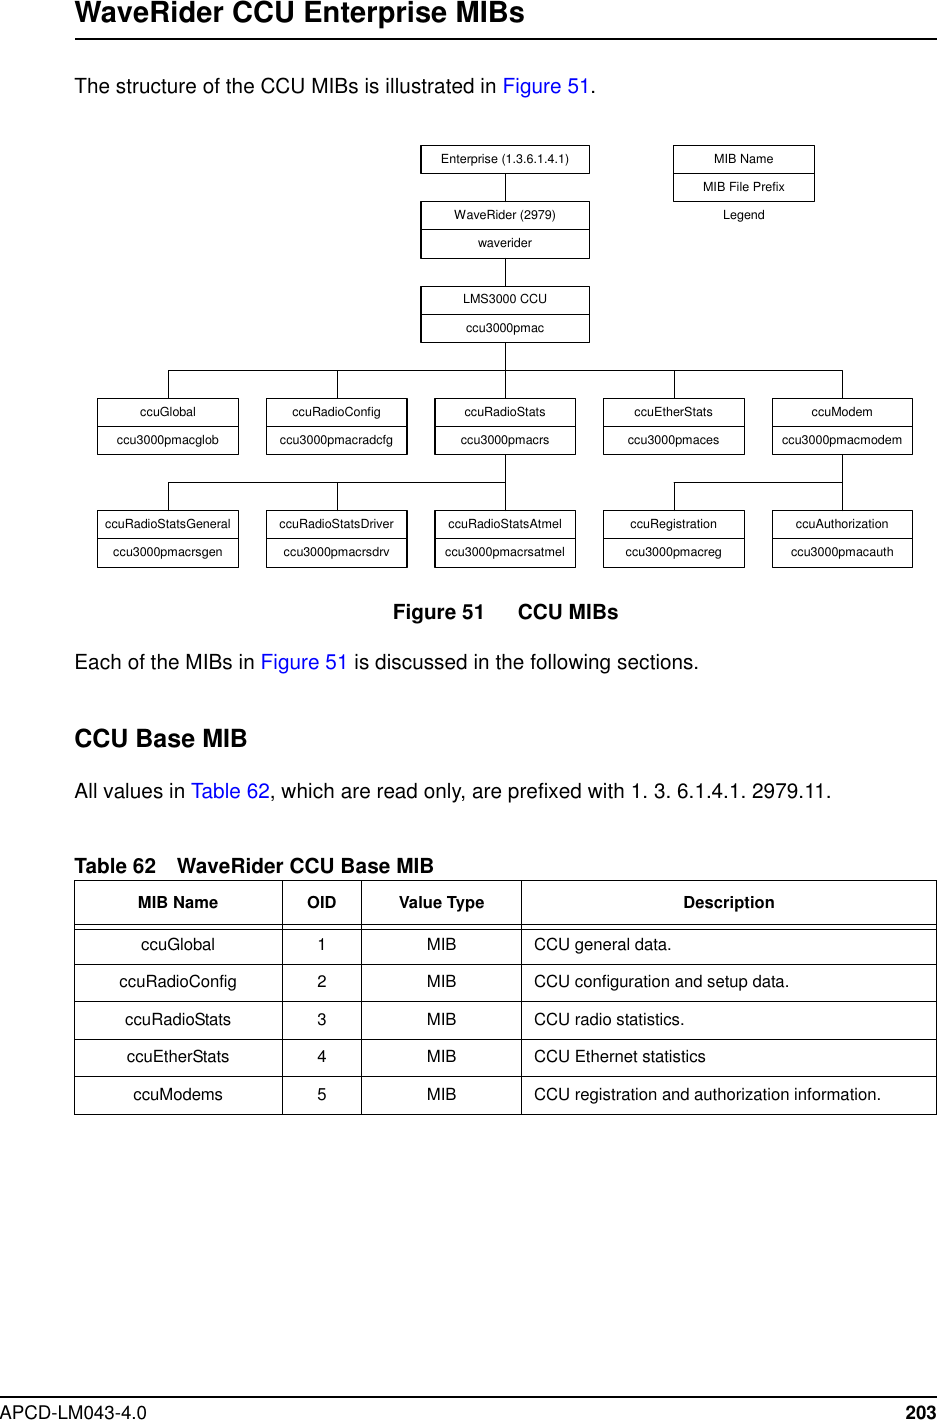 APCD-LM043-4.0 203WaveRider CCU Enterprise MIBsThe structure of the CCU MIBs is illustrated in Figure 51.Figure 51 CCU MIBsEach of the MIBs in Figure 51 is discussed in the following sections.CCU Base MIBAll values in Table 62, which are read only, are prefixed with 1. 3. 6.1.4.1. 2979.11.Table 62 WaveRider CCU Base MIBMIB Name OID Value Type DescriptionccuGlobal 1 MIB CCU general data.ccuRadioConfig 2MIB CCU configuration and setup data.ccuRadioStats 3MIB CCU radio statistics.ccuEtherStats 4MIB CCU Ethernet statisticsccuModems 5MIB CCU registration and authorization information.WaveRider (2979)waveriderccuGlobalccu3000pmacglobccuRadioConfigccu3000pmacradcfgccuRadioStatsccu3000pmacrsccuEtherStatsccu3000pmacesccuModemccu3000pmacmodemccuRadioStatsGeneralccu3000pmacrsgenccuRadioStatsDriverccu3000pmacrsdrvccuRadioStatsAtmelccu3000pmacrsatmelccuRegistrationccu3000pmacregccuAuthorizationccu3000pmacauthEnterprise (1.3.6.1.4.1)LMS3000 CCUccu3000pmacMIB NameMIB File PrefixLegend